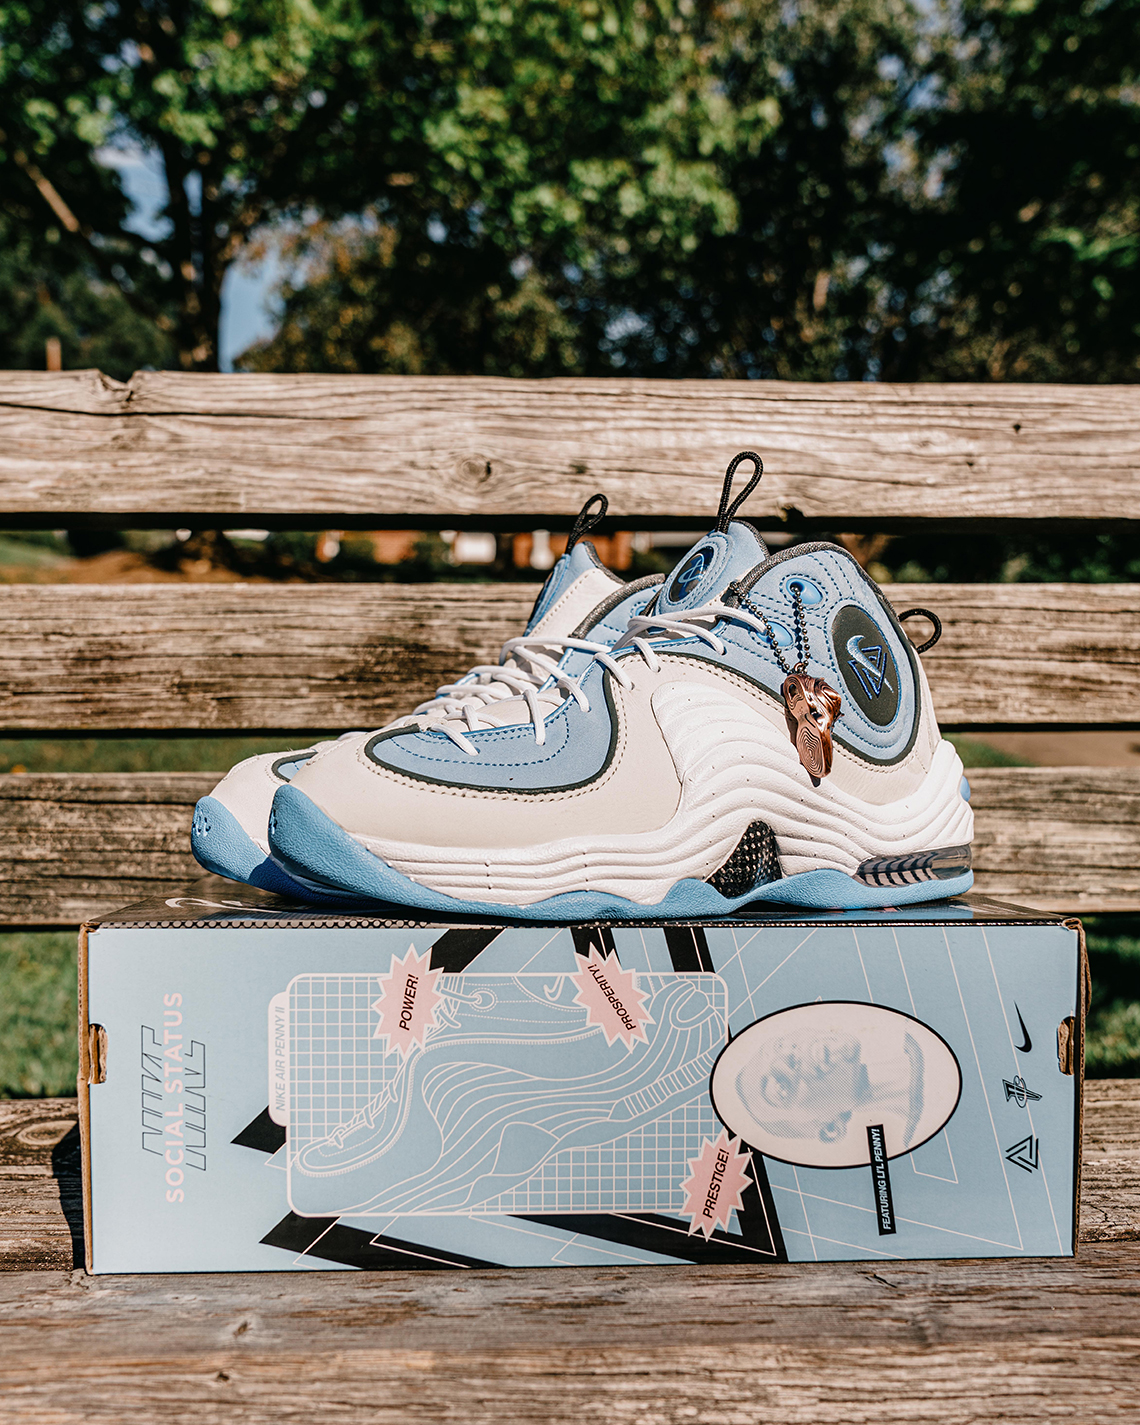 social status nike air penny 2 playground white blue release date 5